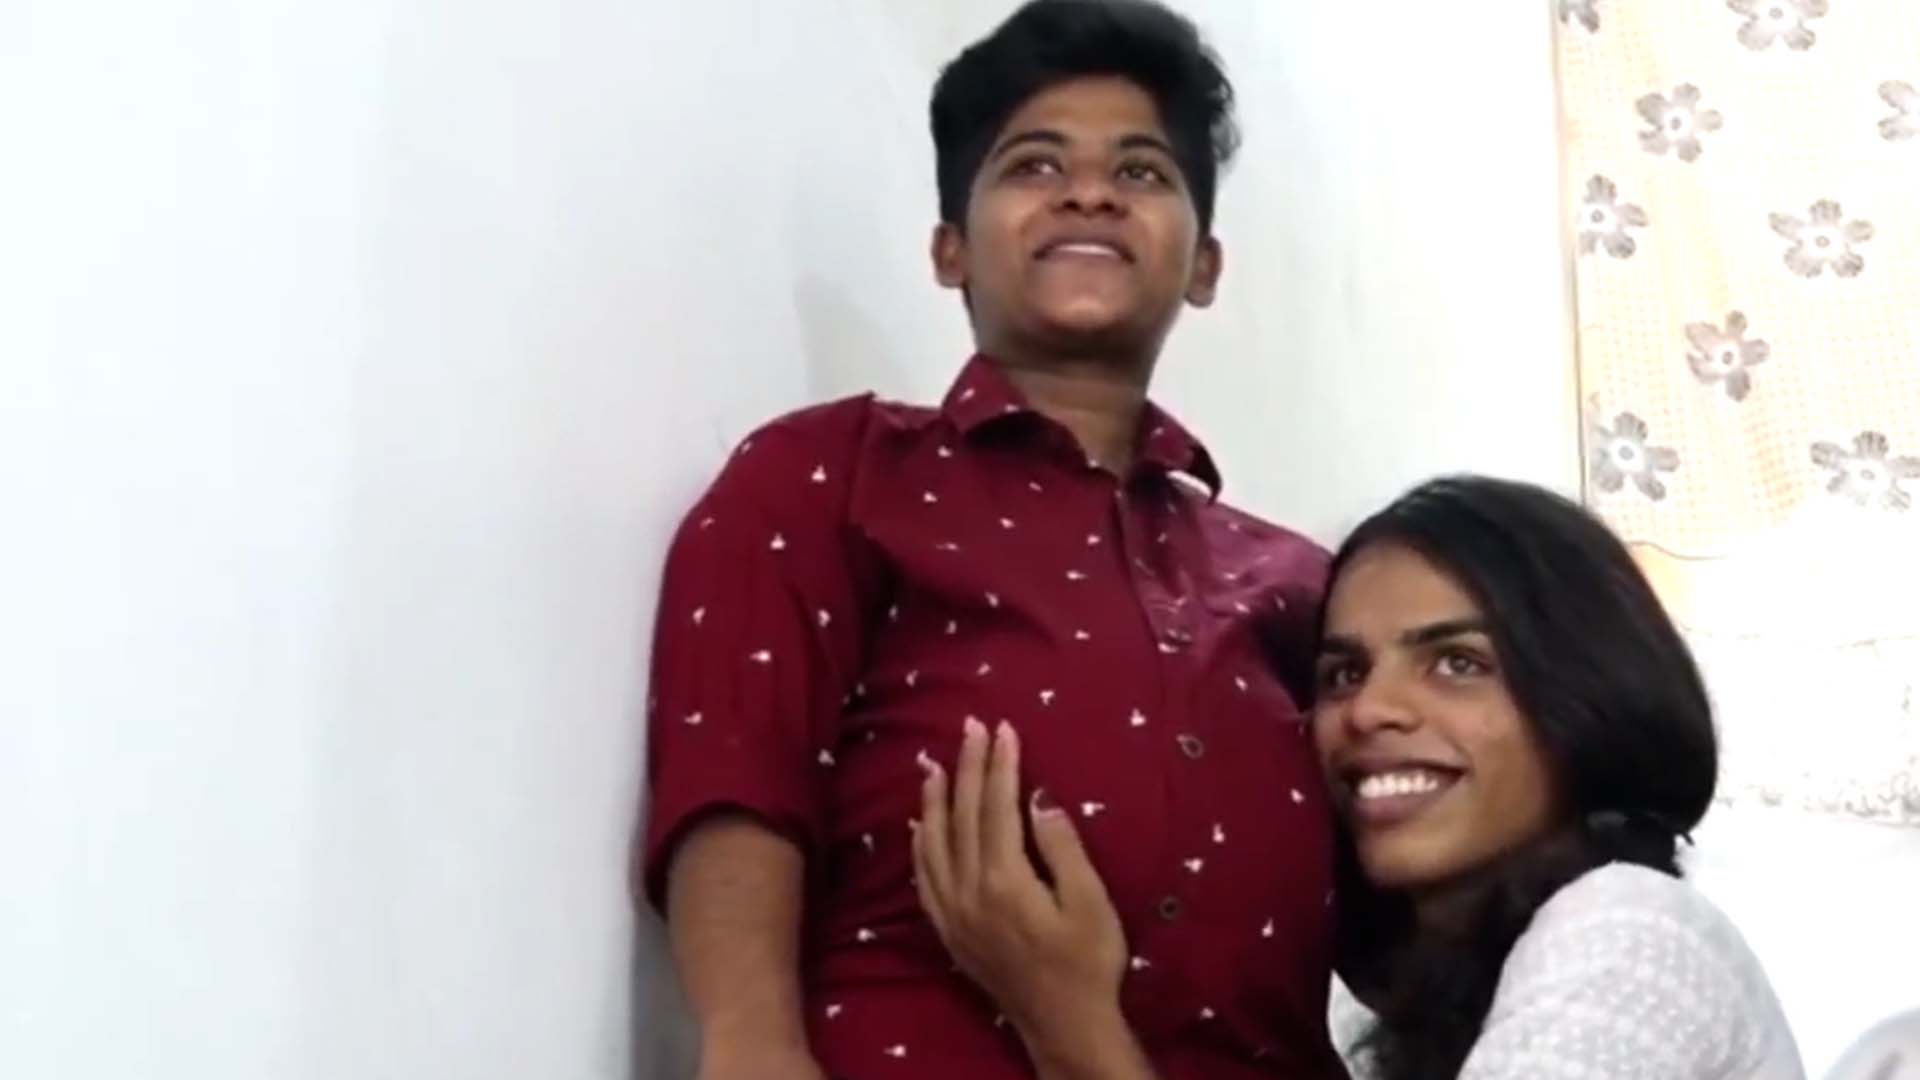 Pregnant Indian dad gives birth to healthy baby, making history with trans partner | South China Morning Post